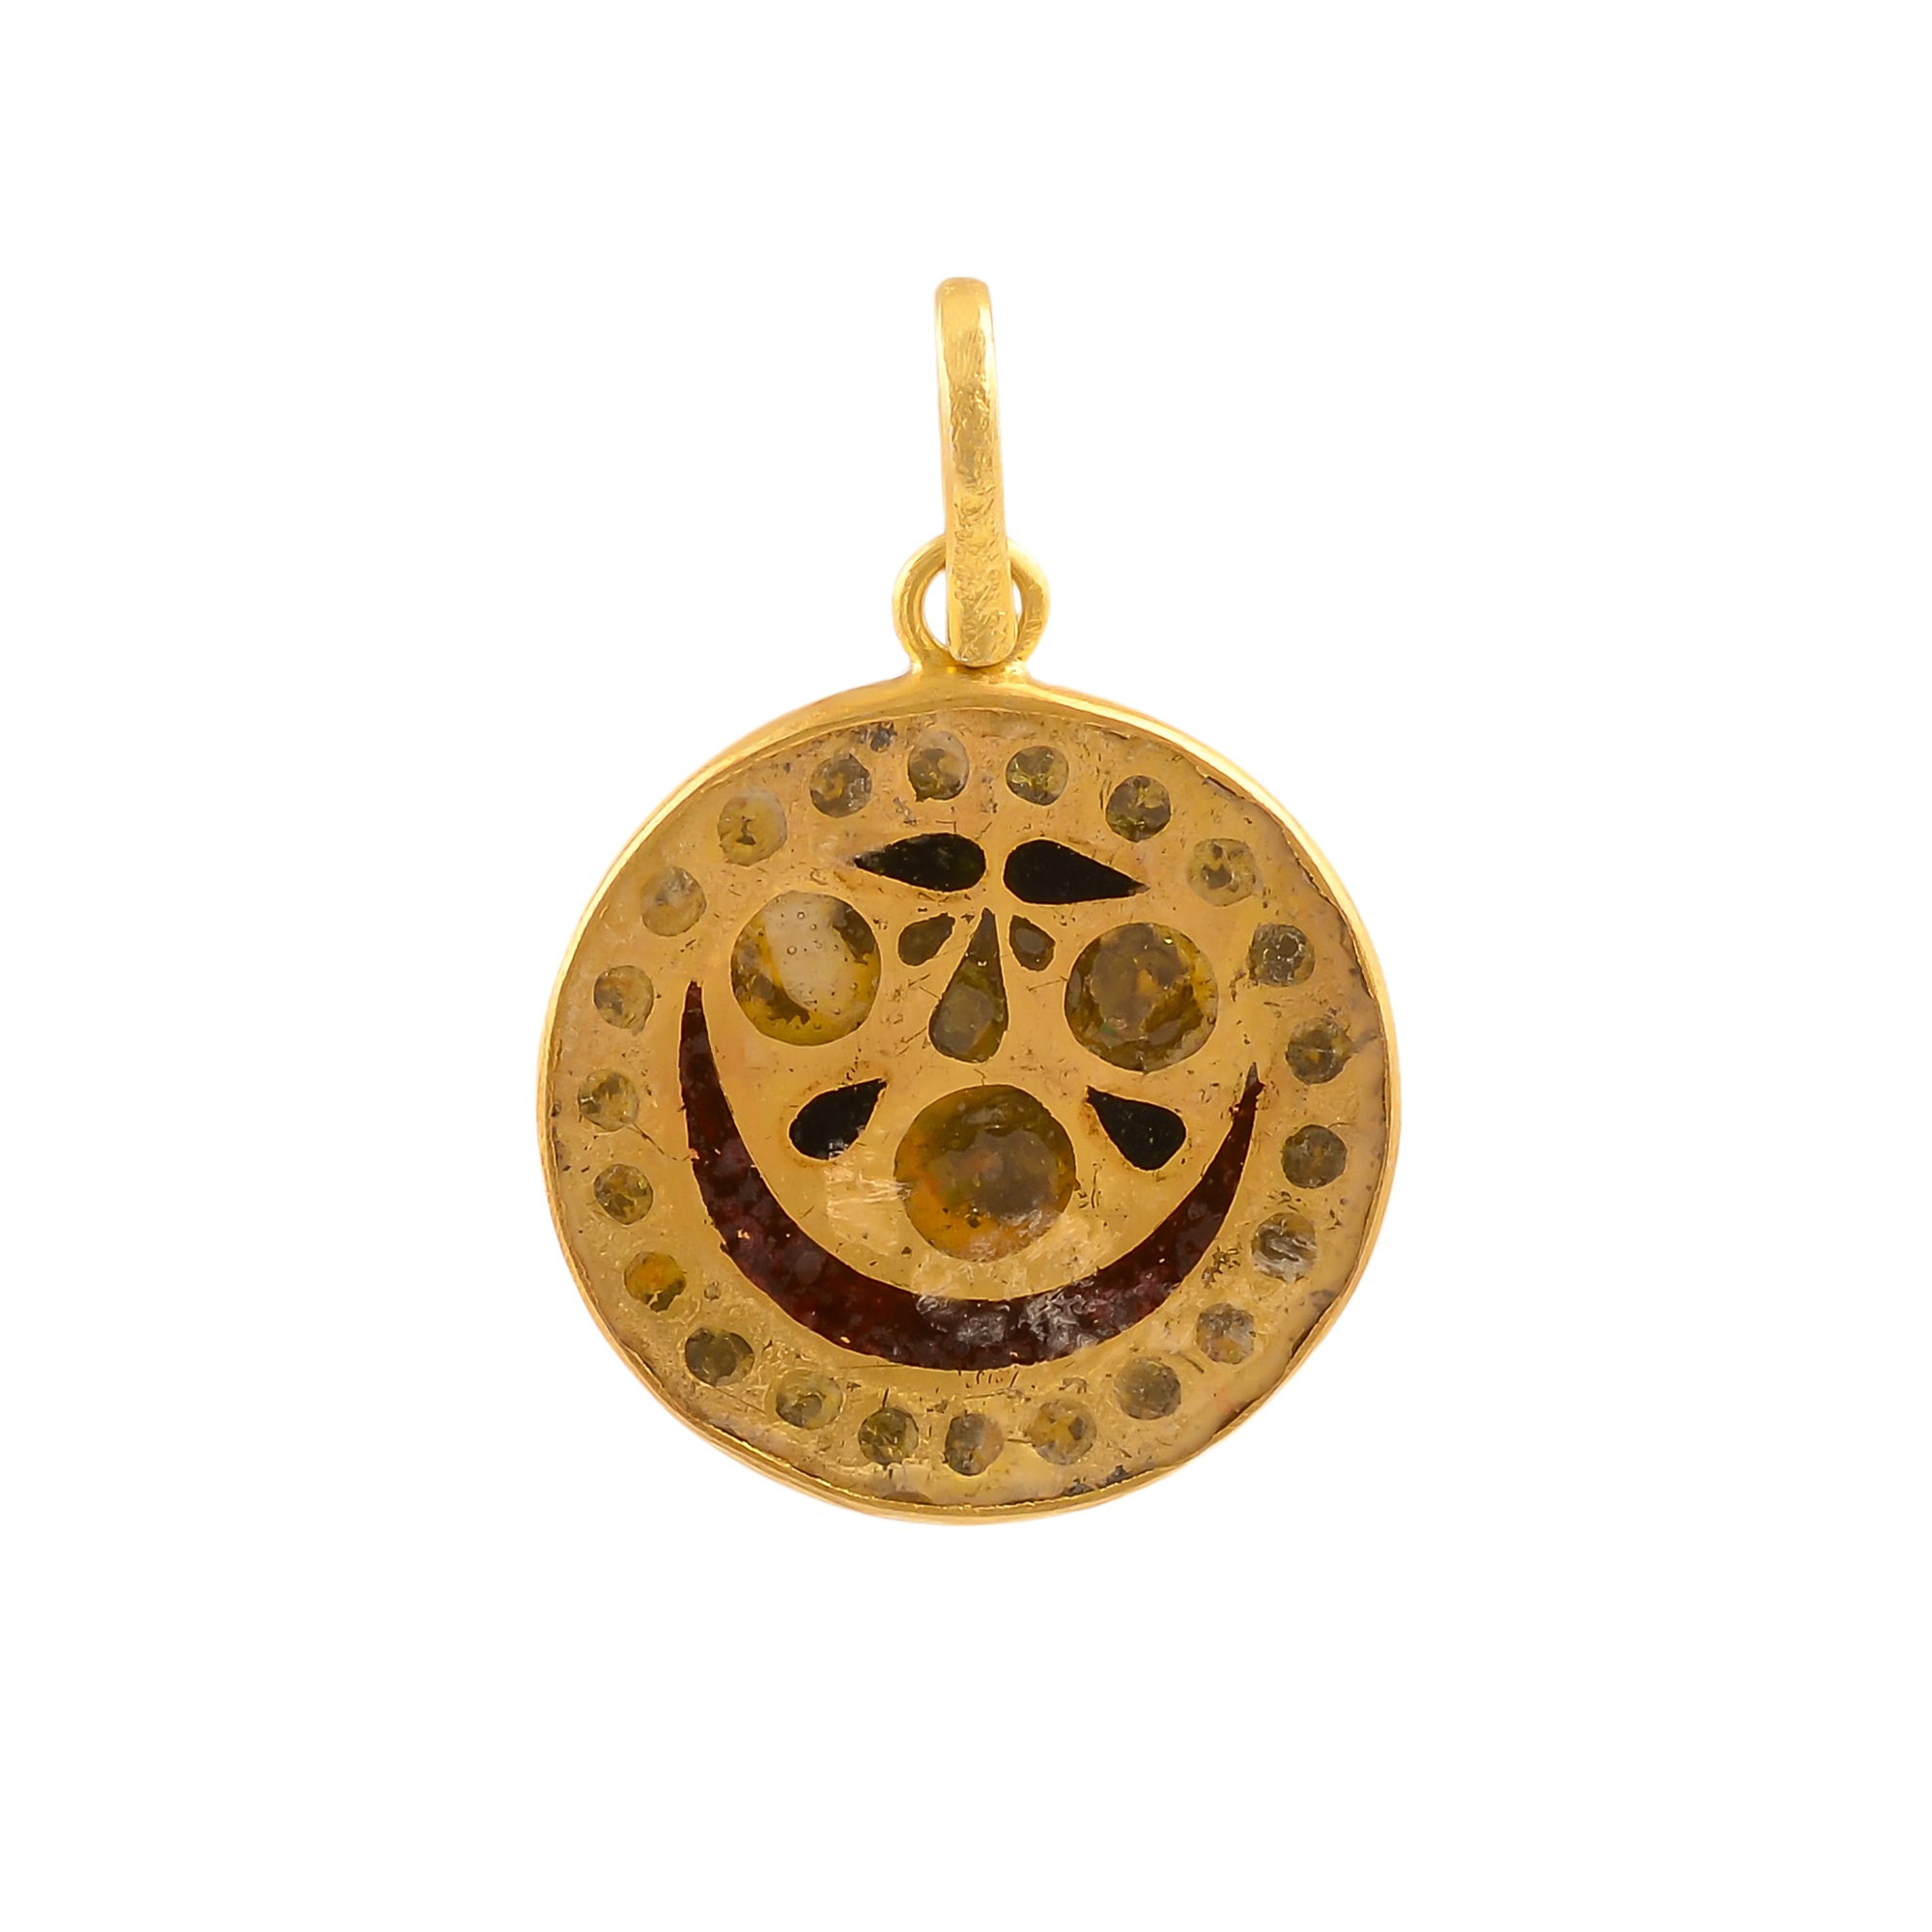 Buy Indian Handcrafted Silver Gold Plated Old Thewa Pendant